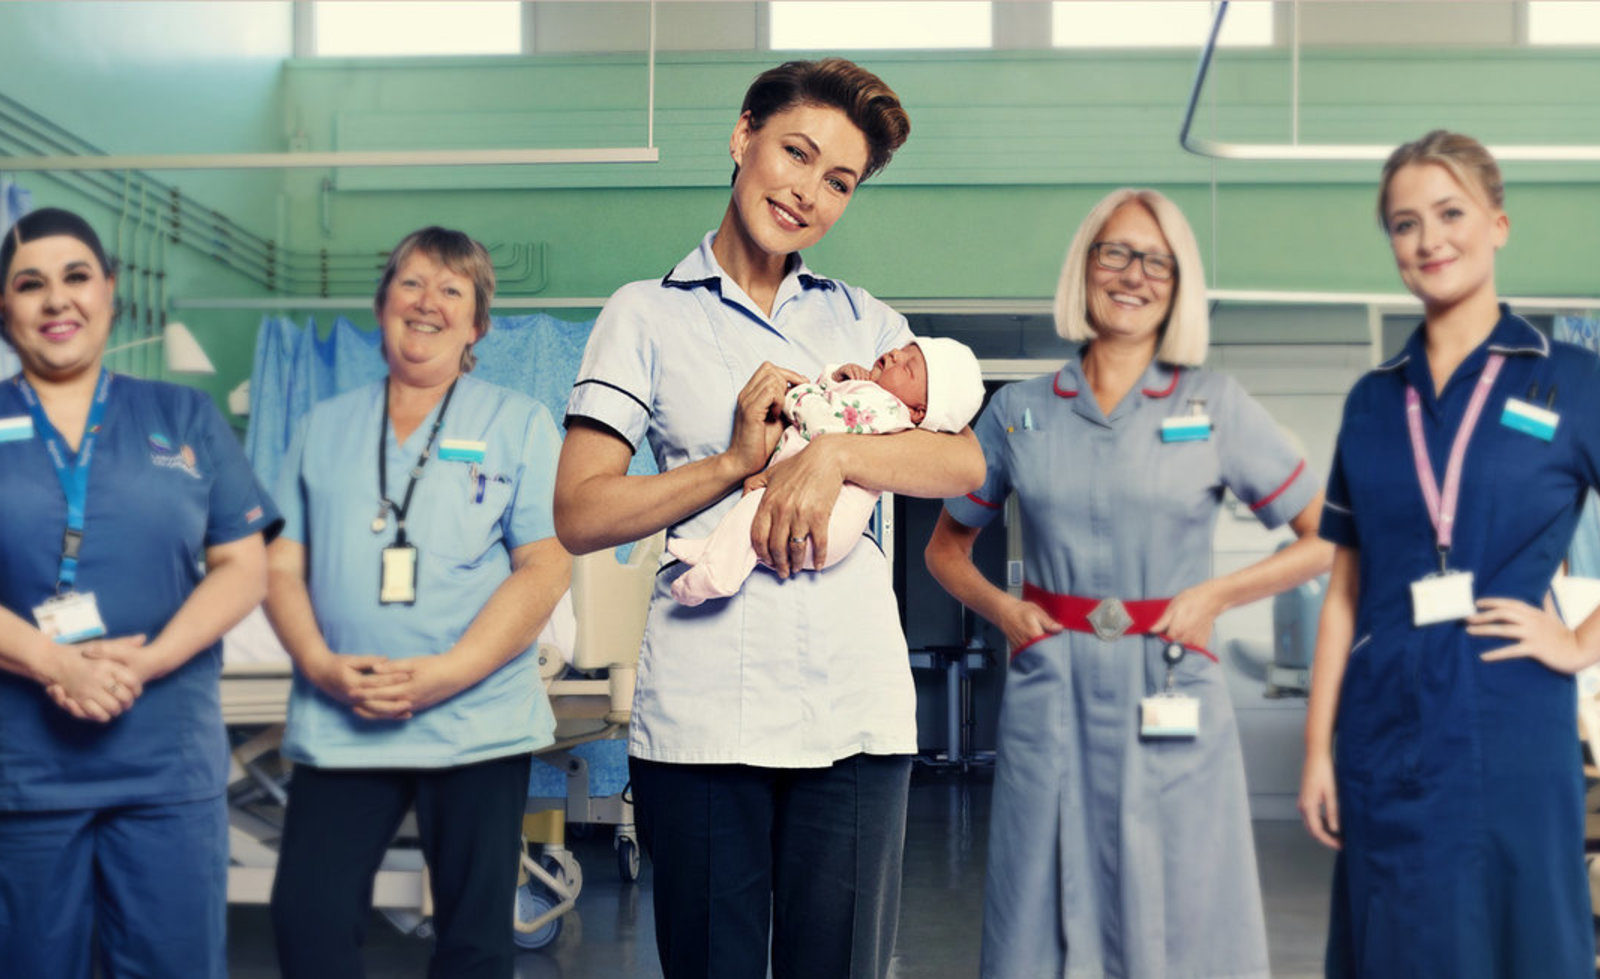 Emma Willis starred in a documentary series covering her training to become a midwife.